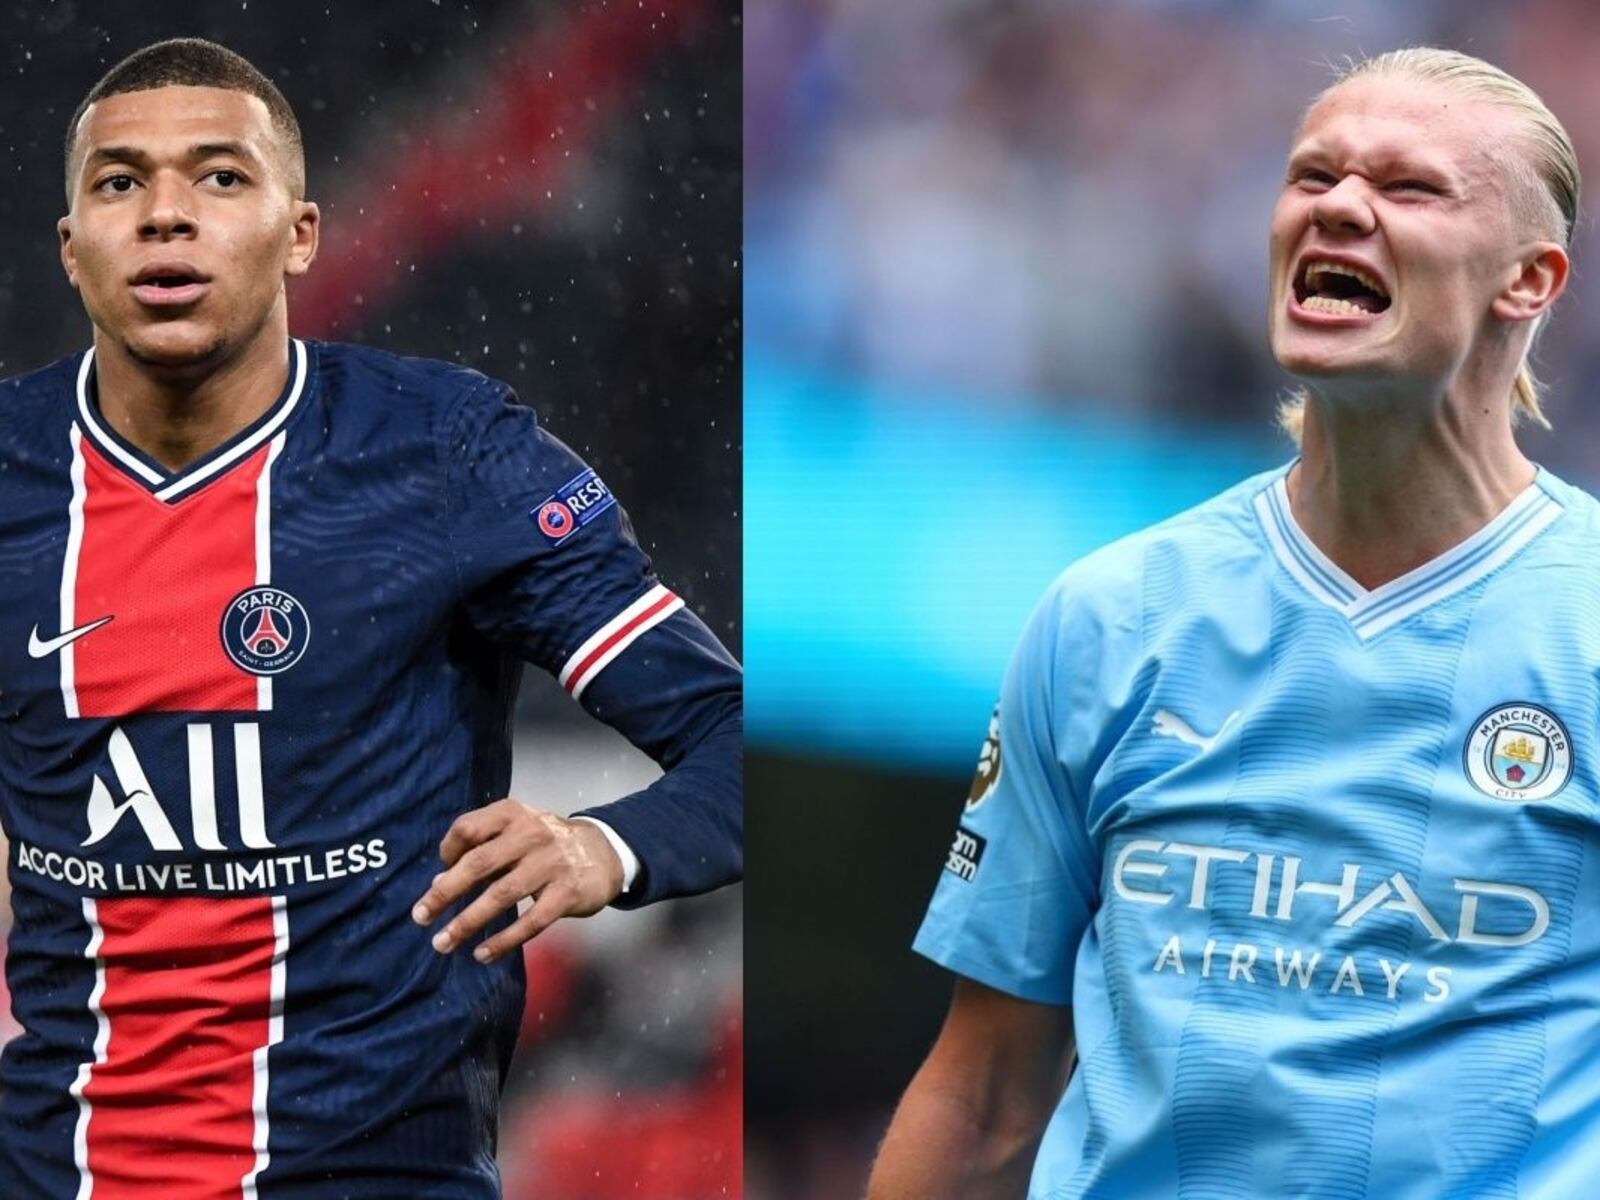 Neither Haaland nor Mbappé, the 70 million star that Real Madrid wants